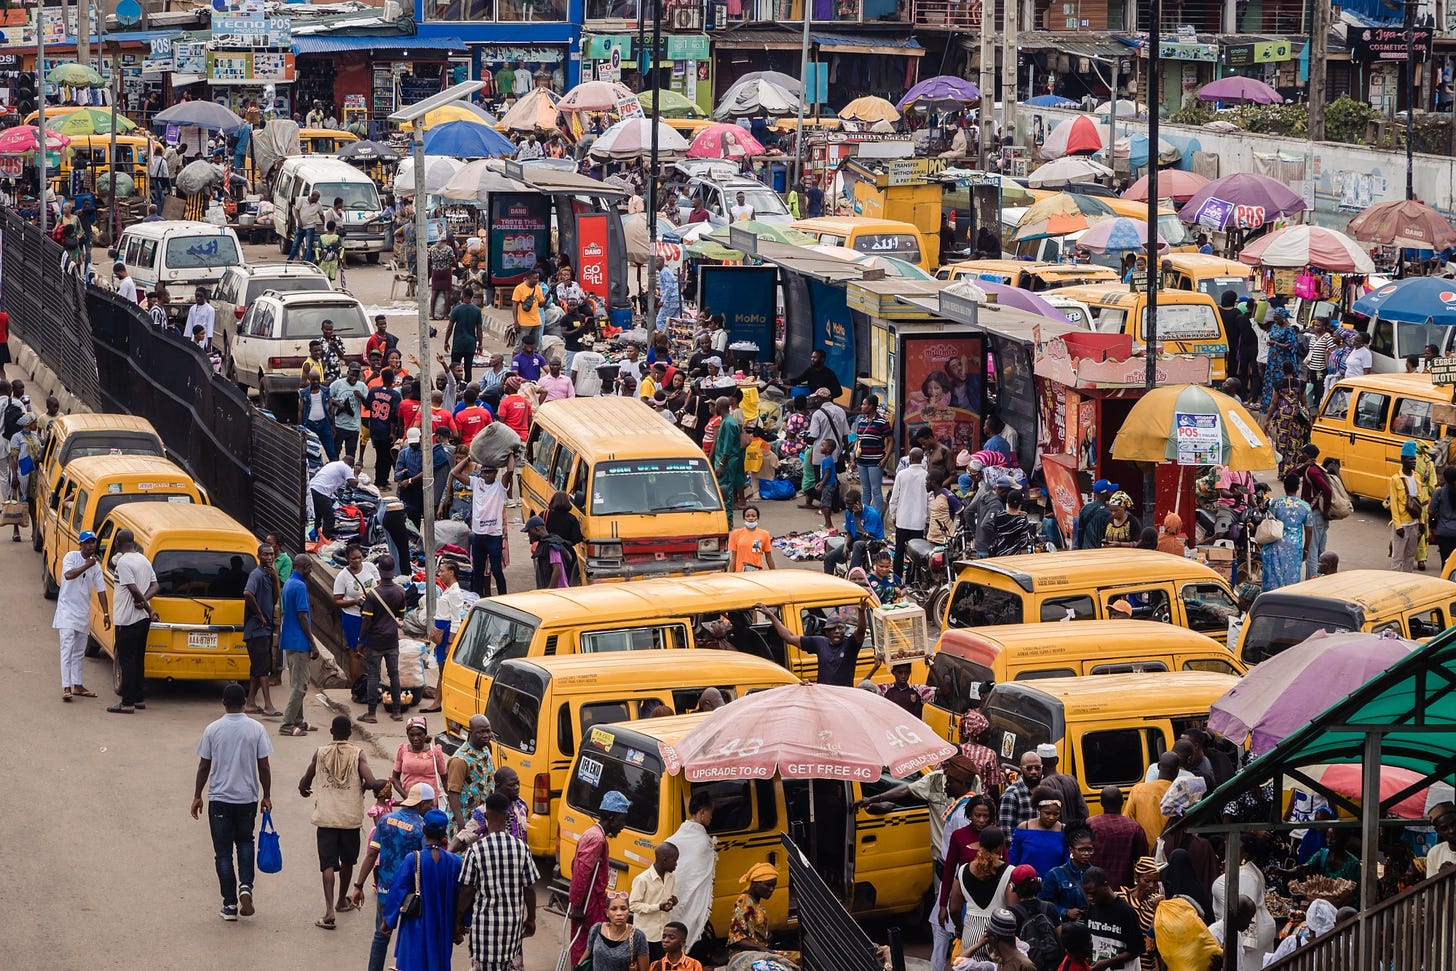 Market stall vendors and passengers at a taxi rank in Lagos, Nigeria.